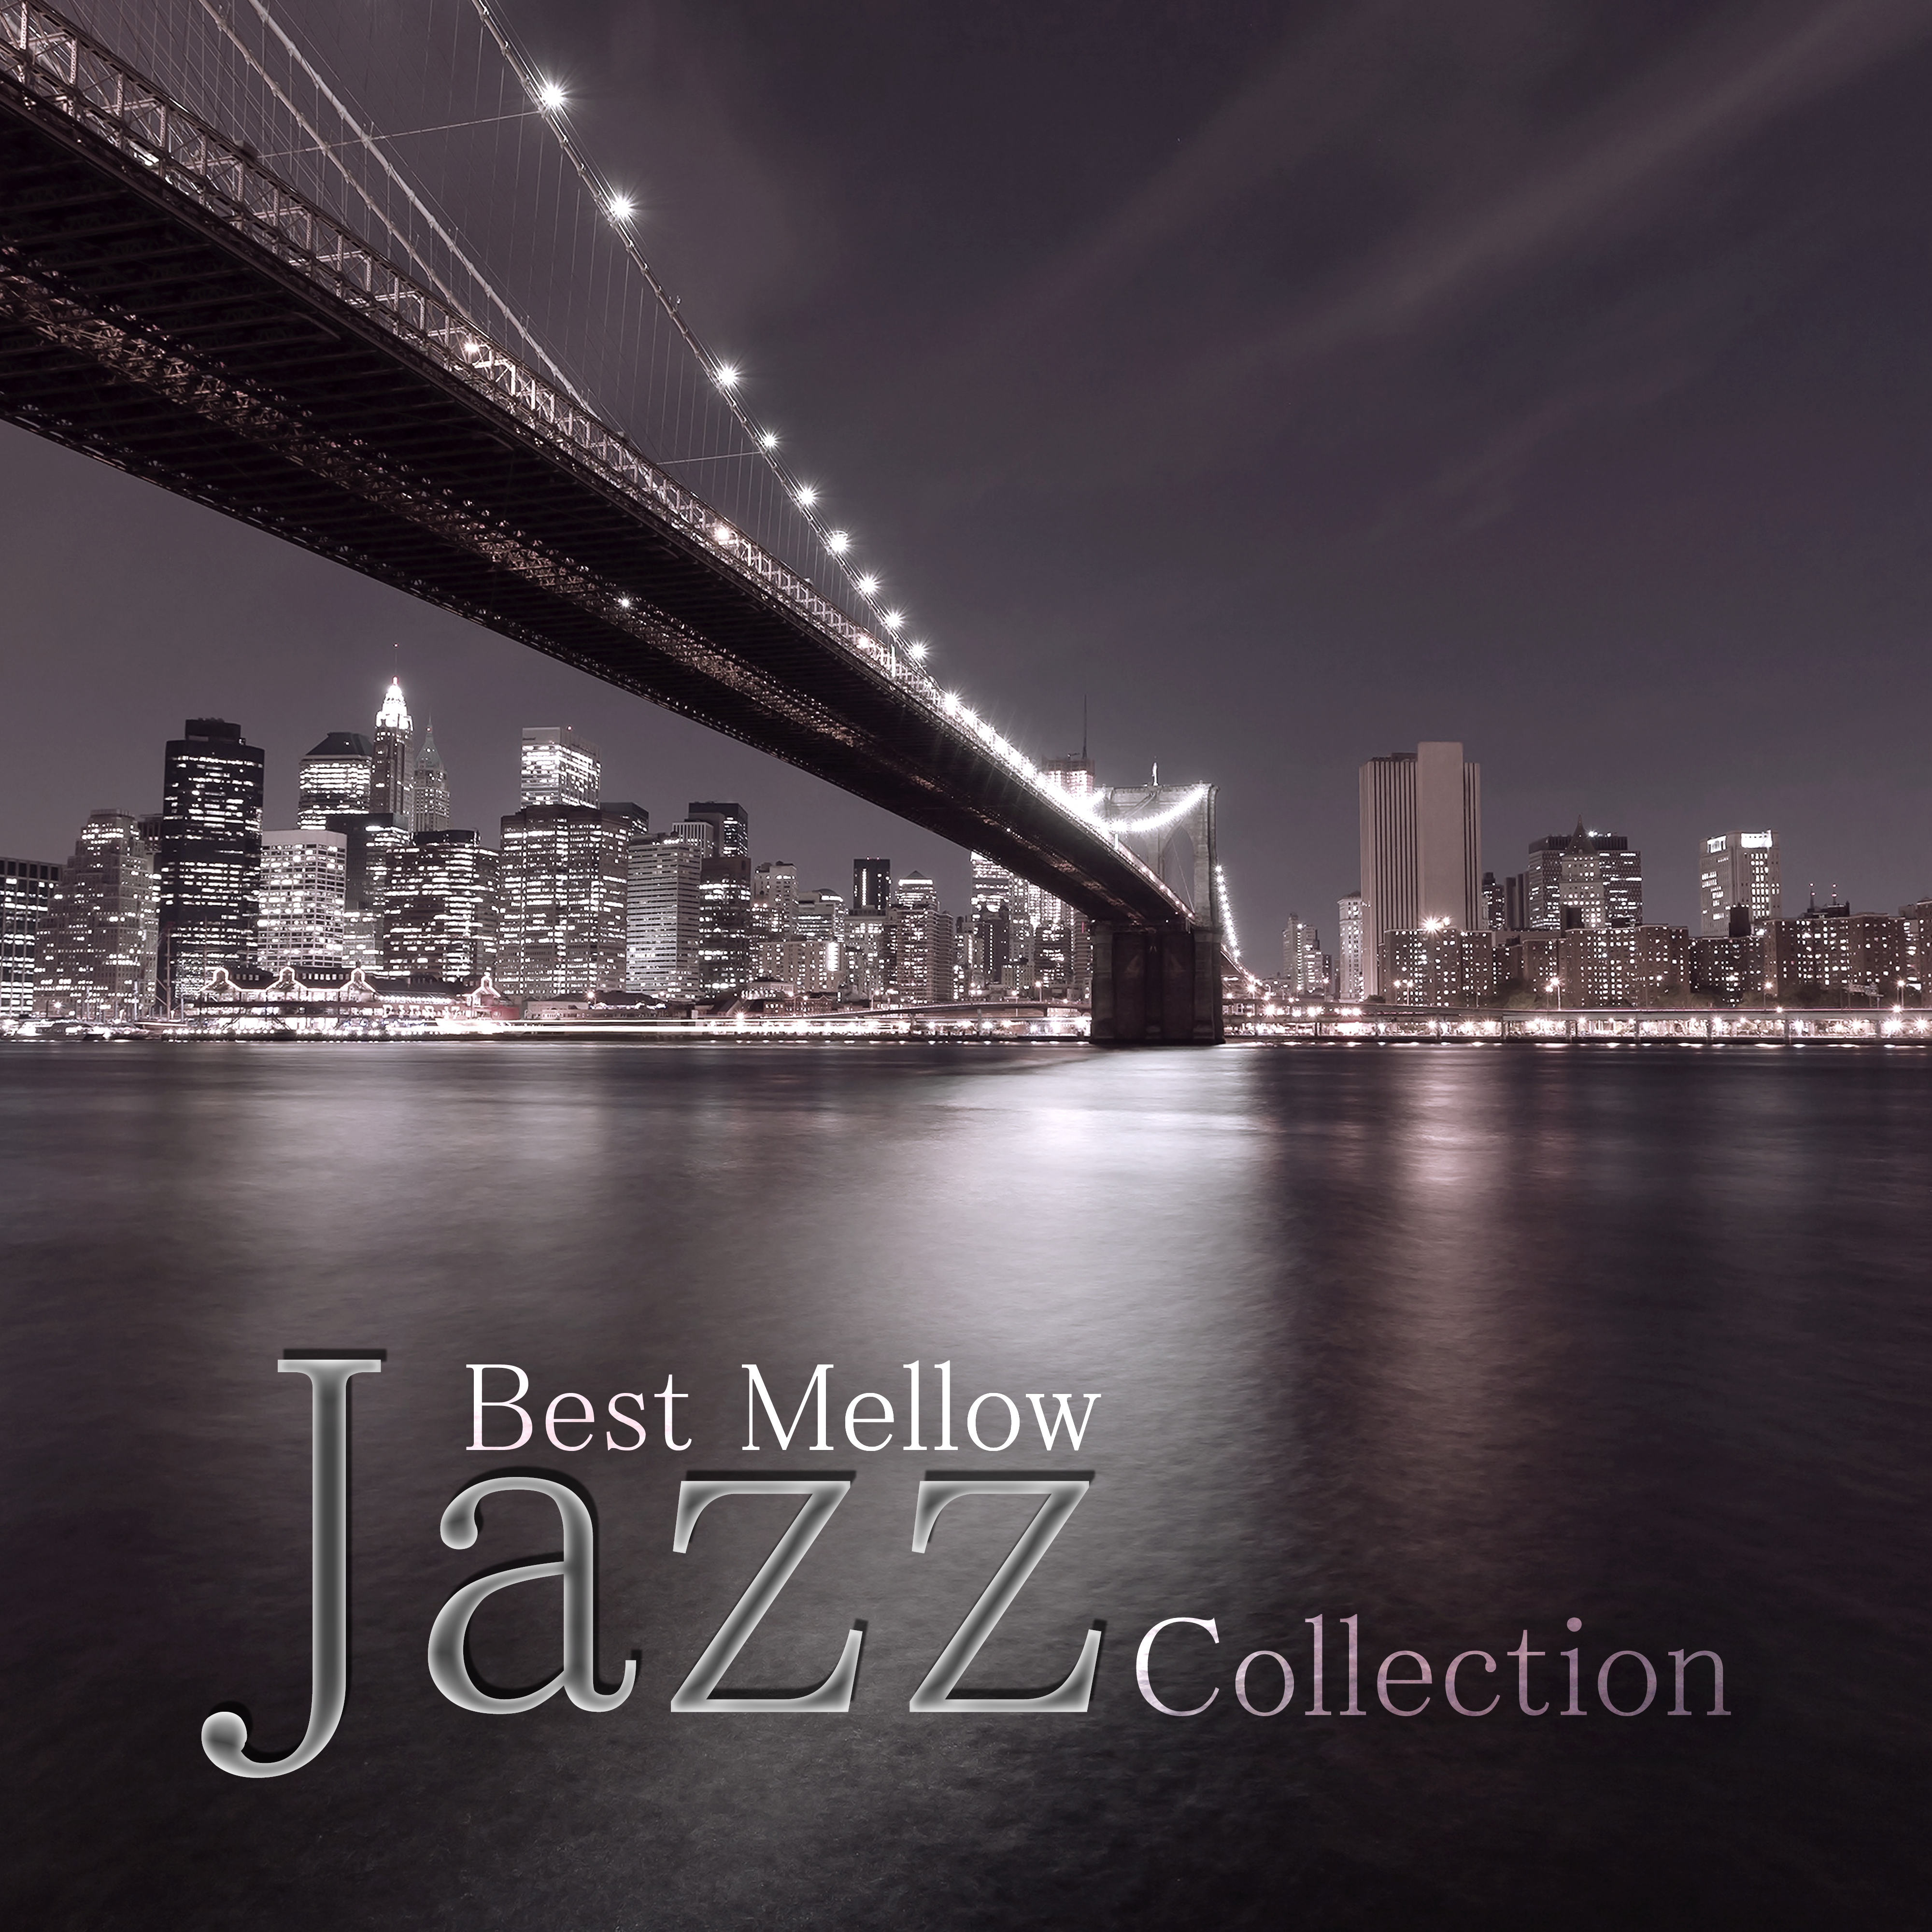 Best Mellow Jazz Collection  Cool Instrumental Piano Jazz Music, Sensual Sounds for Serenity, Smooth Jazz Guitar Lounge Grooves